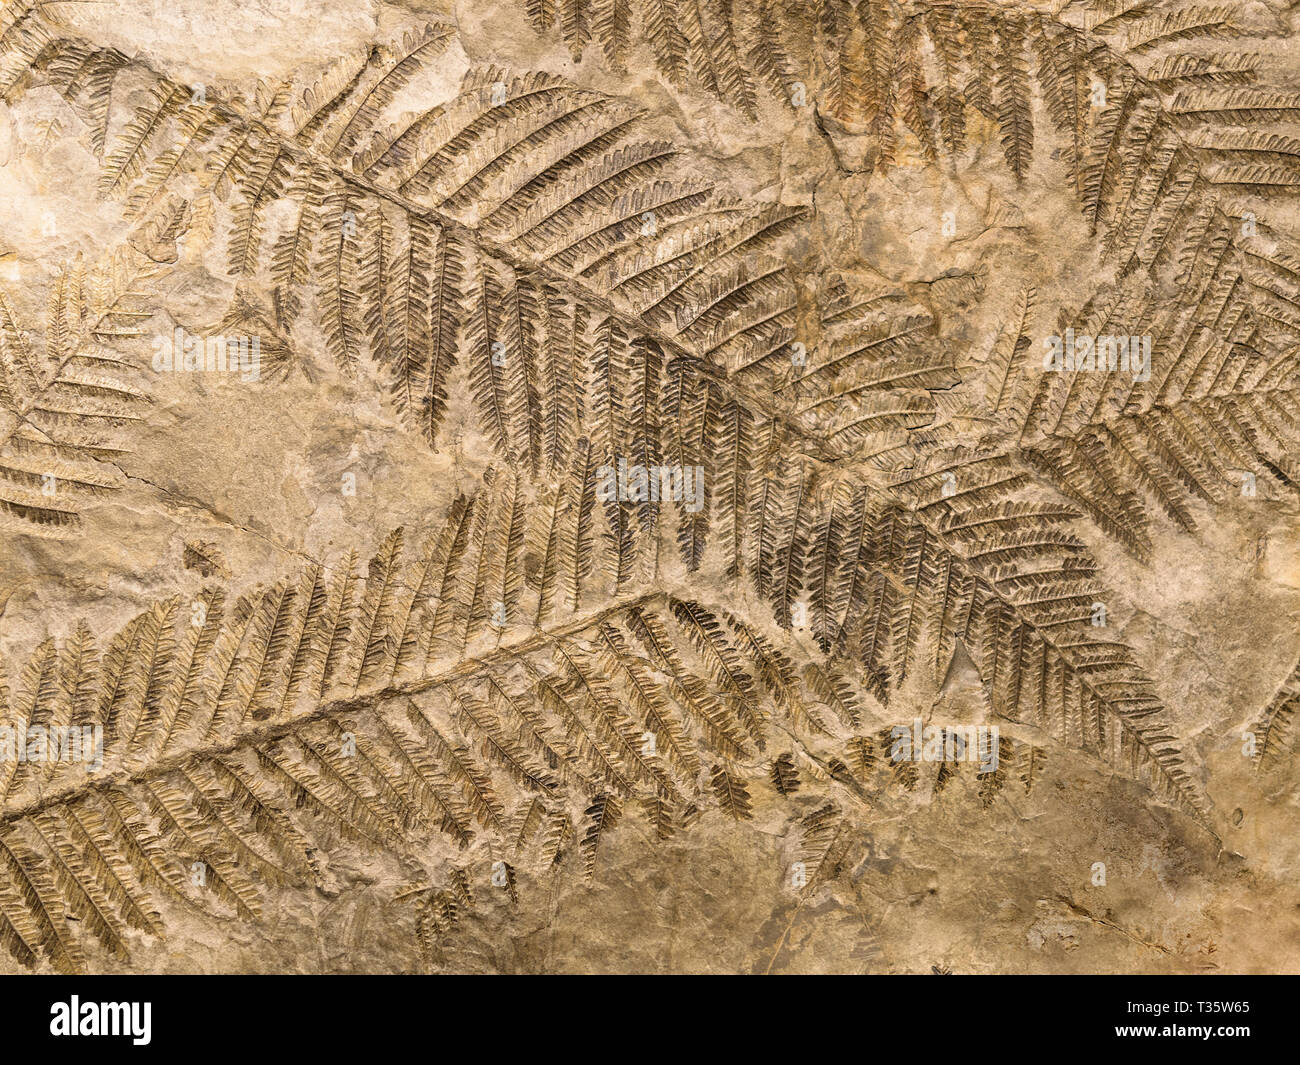 Petrified prehistorical fronds of fern imprint on the stone with plants branches and foliage Stock Photo